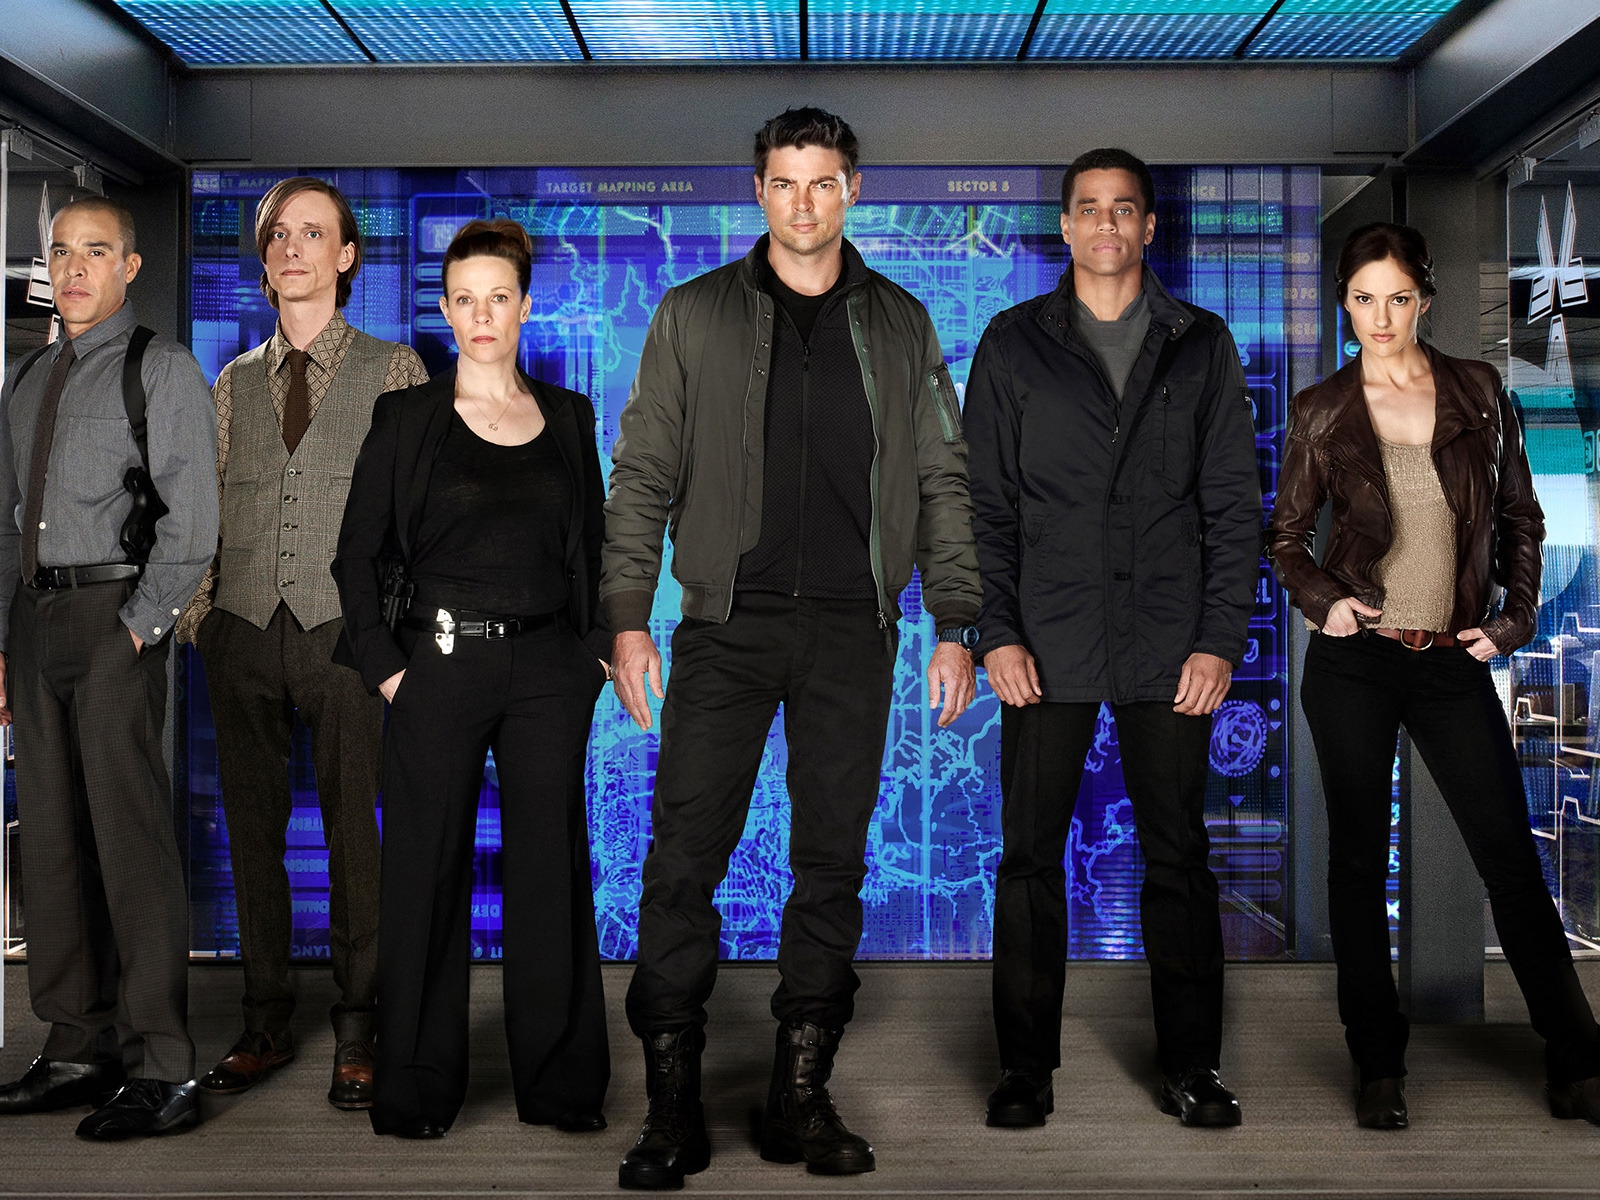 Almost Human Cast for 1600 x 1200 resolution